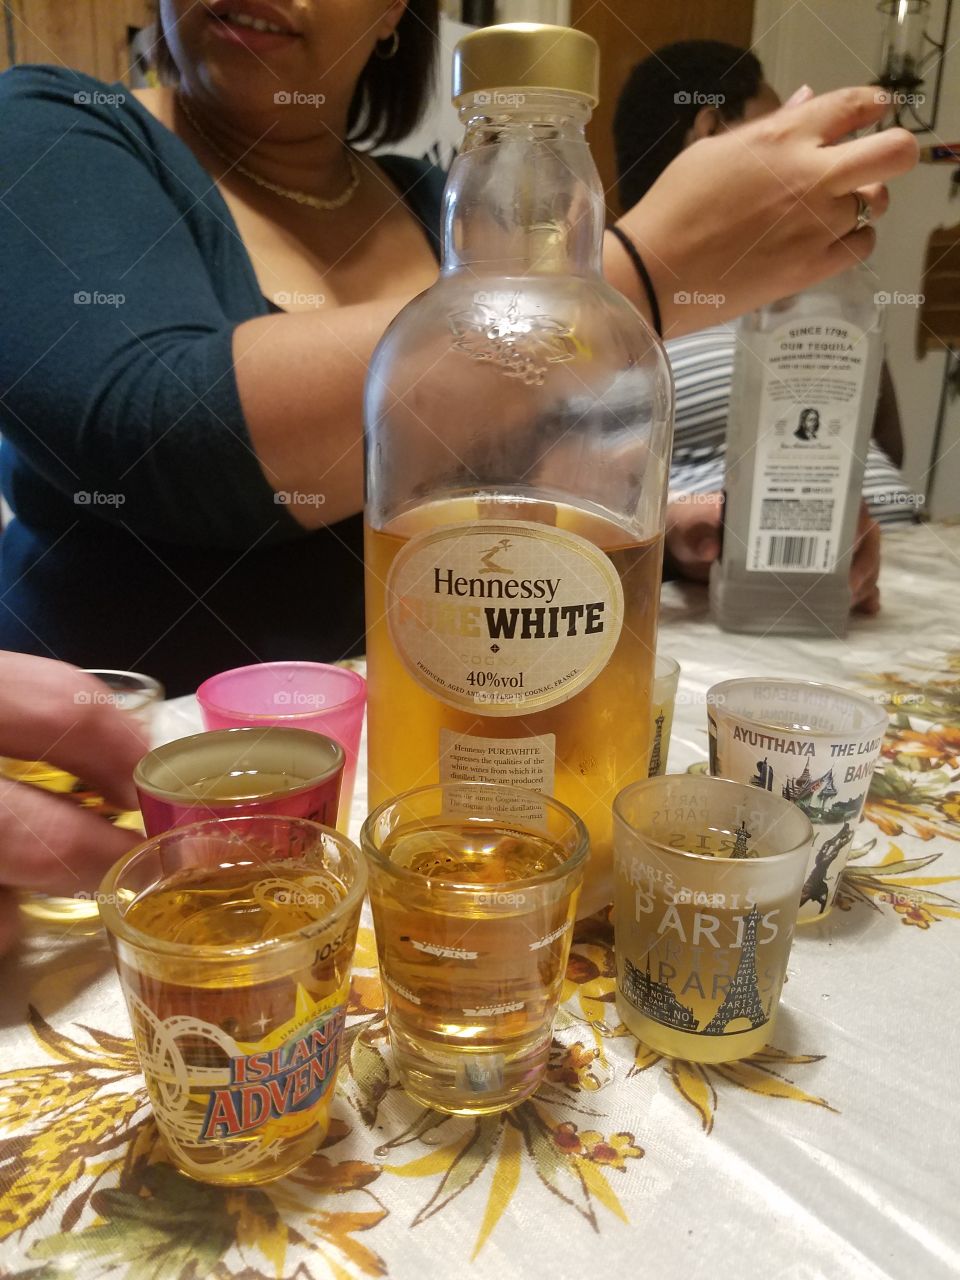 Hennessy White Shots for the Holidays with family and friends